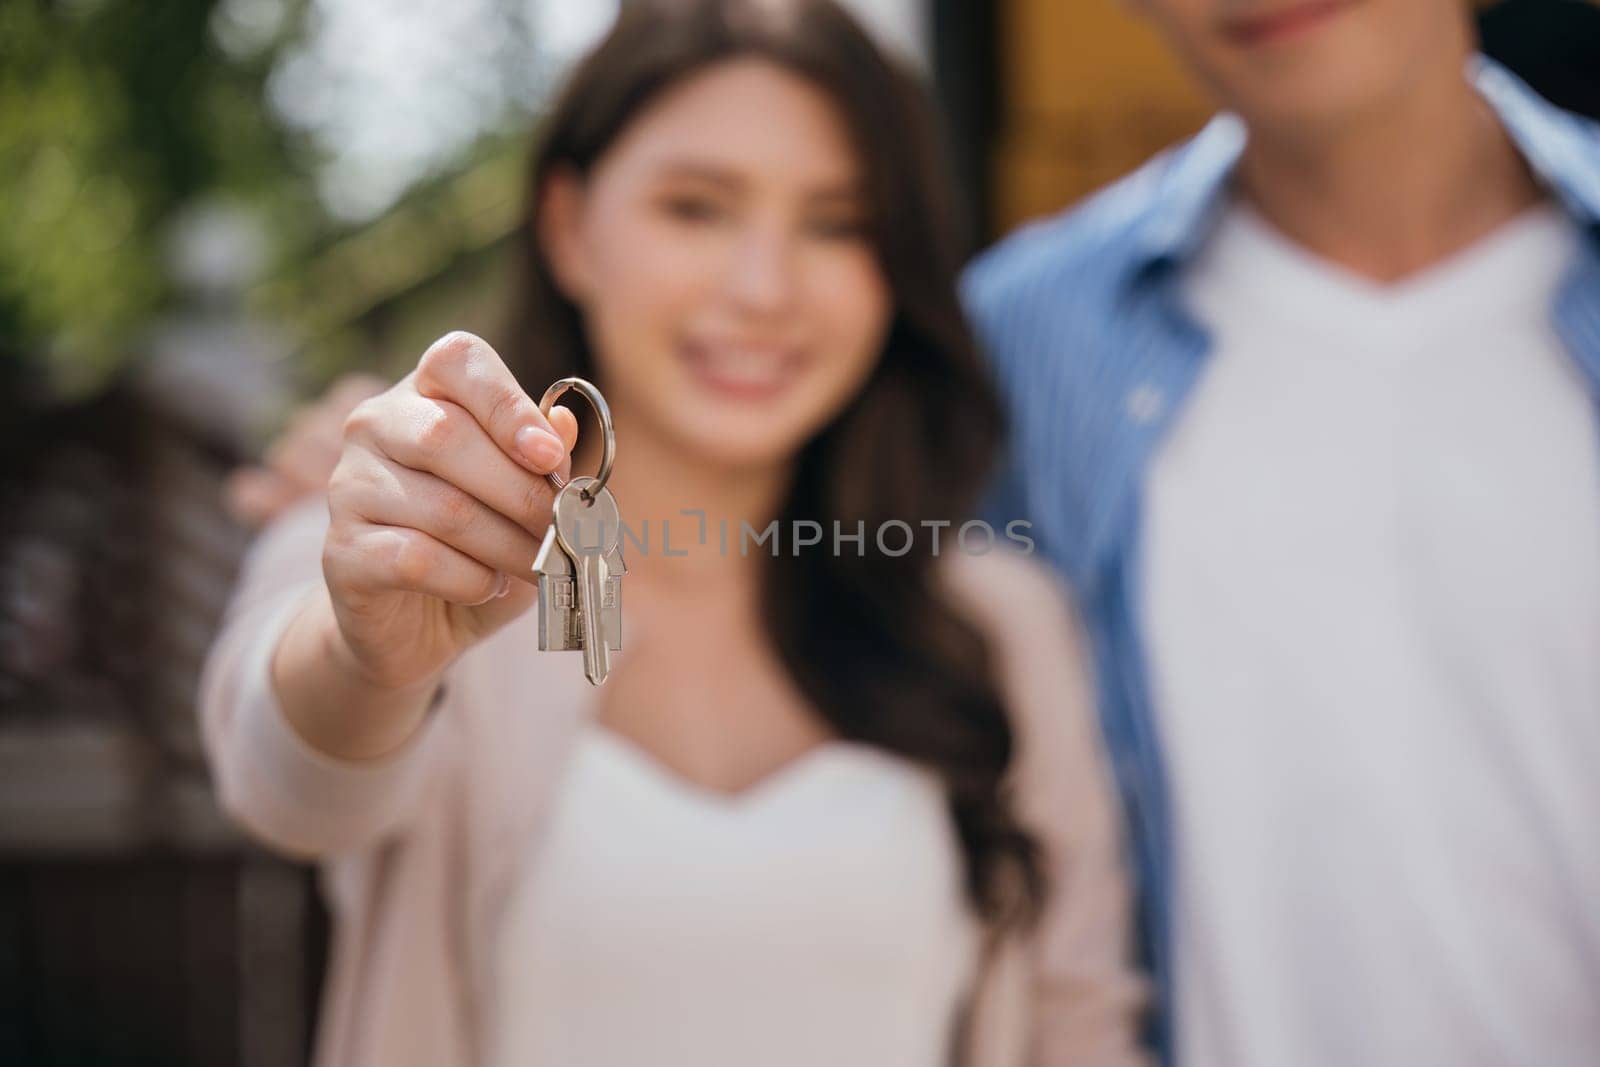 A successful home relocation is captured as a couple displays keys while carrying a mattress. Their happiness echoes the joy of moving in real estate. Moving Day Concept